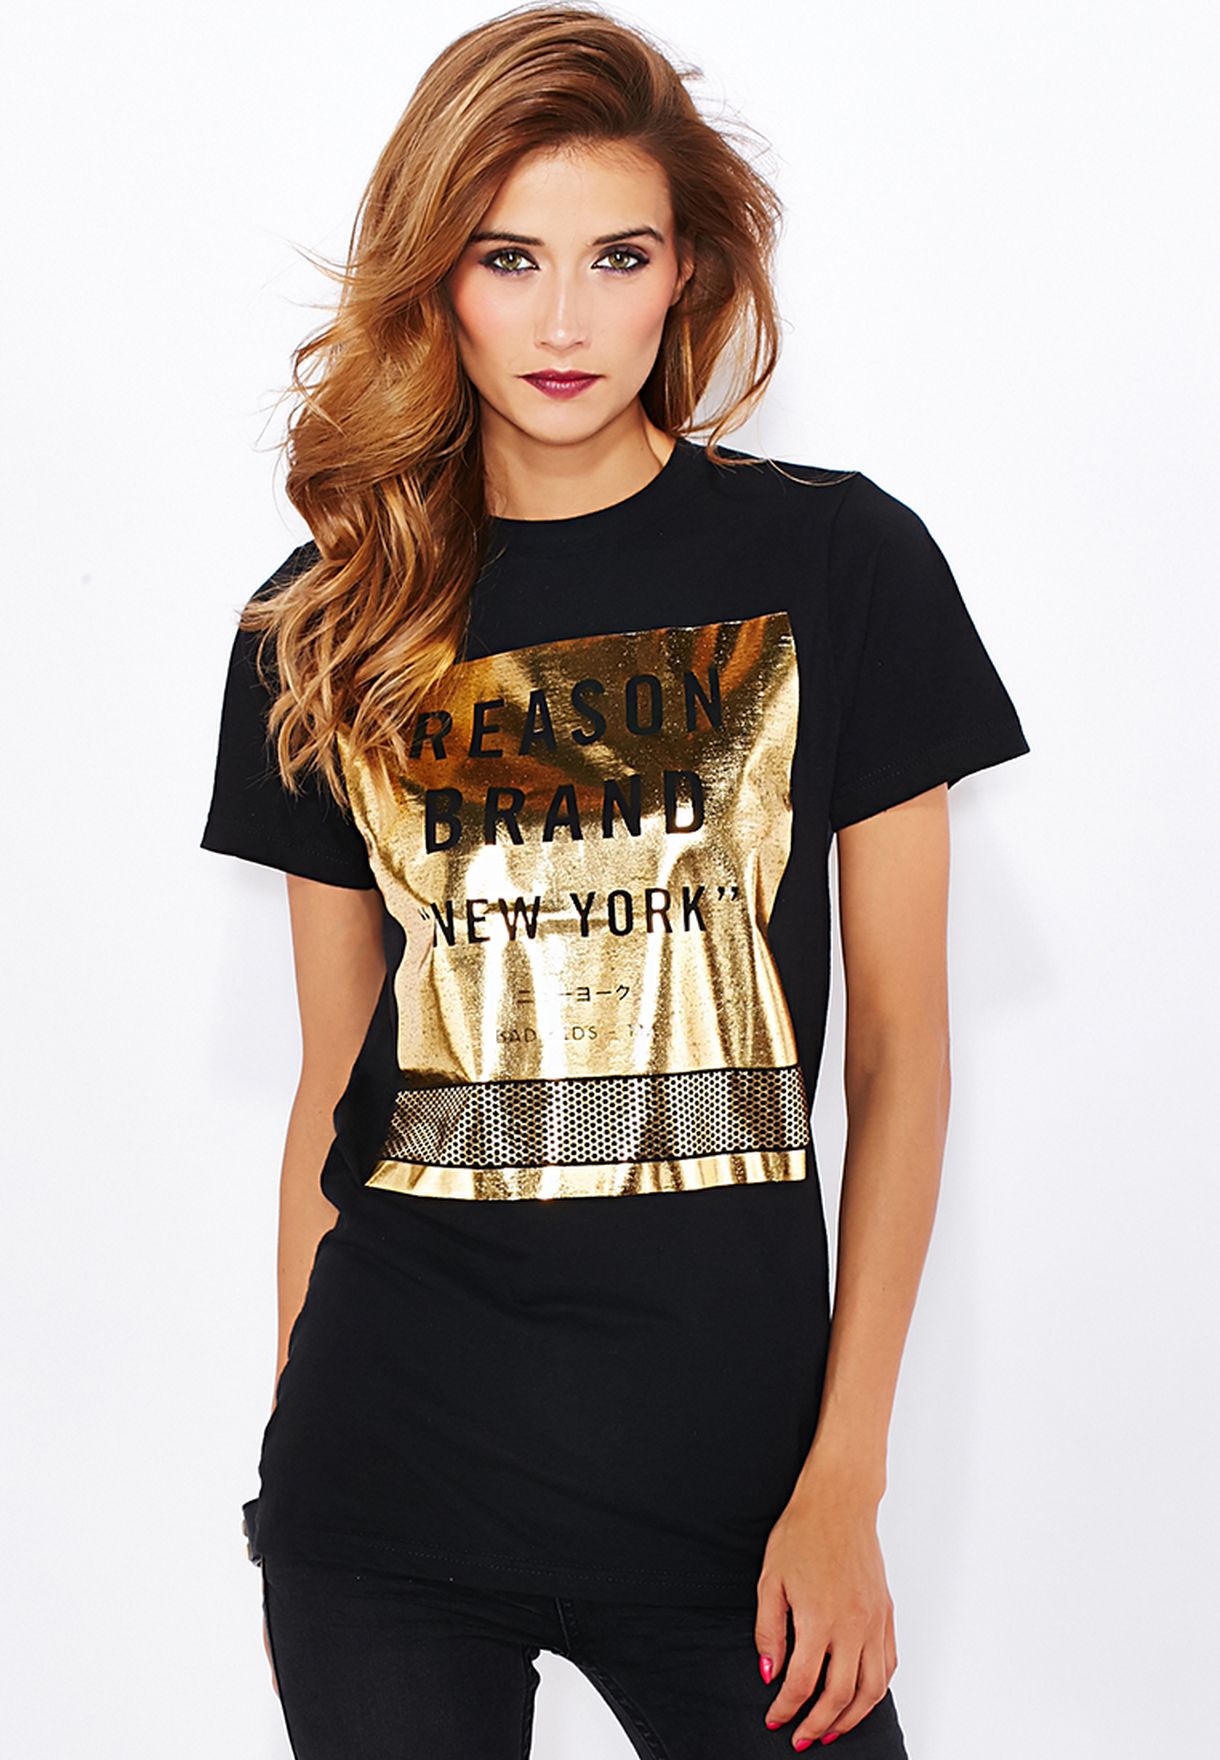 Buy > black shirt with gold print > in stock